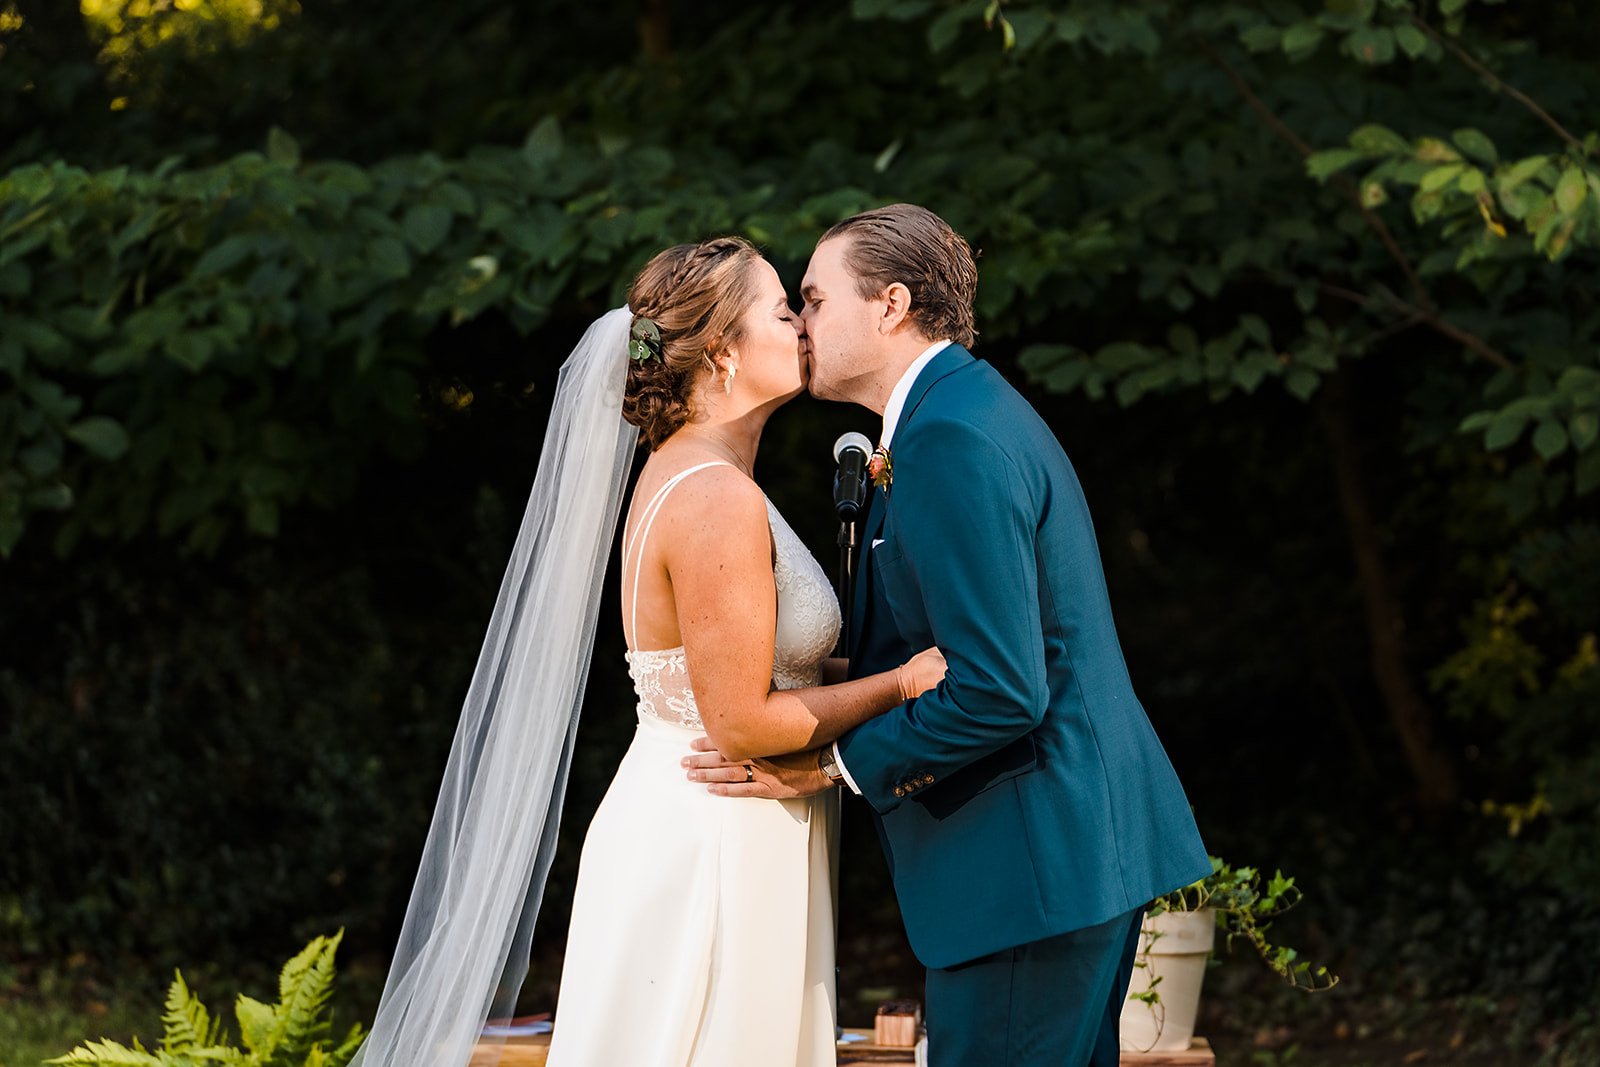 Bride and groom first kiss at end of Awbury Arboretum wedding ceremony